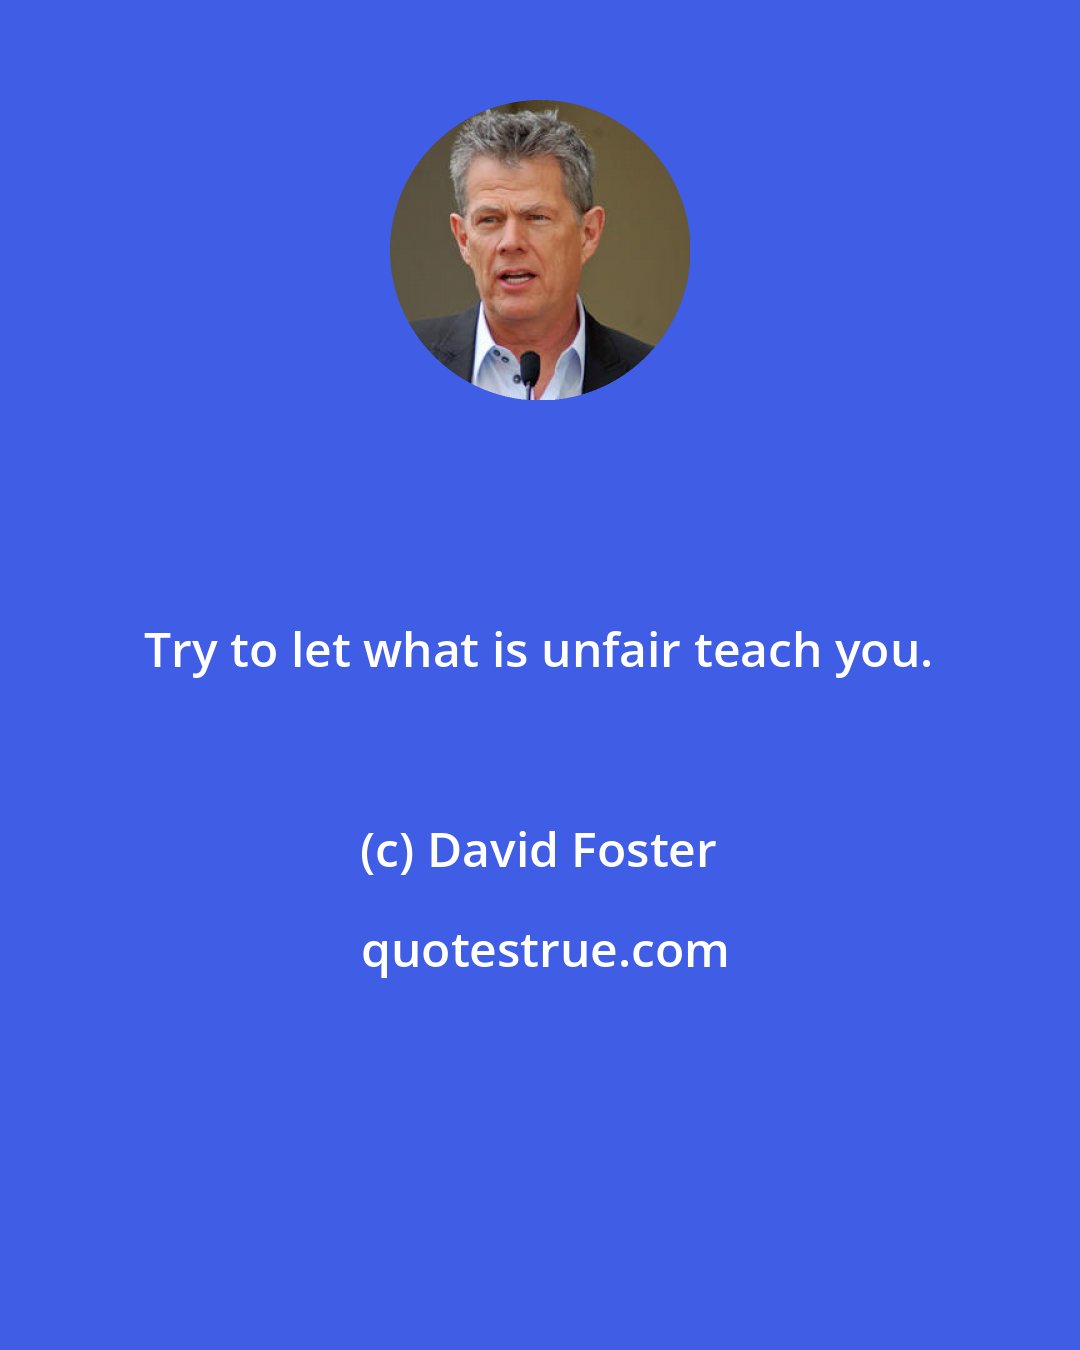 David Foster: Try to let what is unfair teach you.